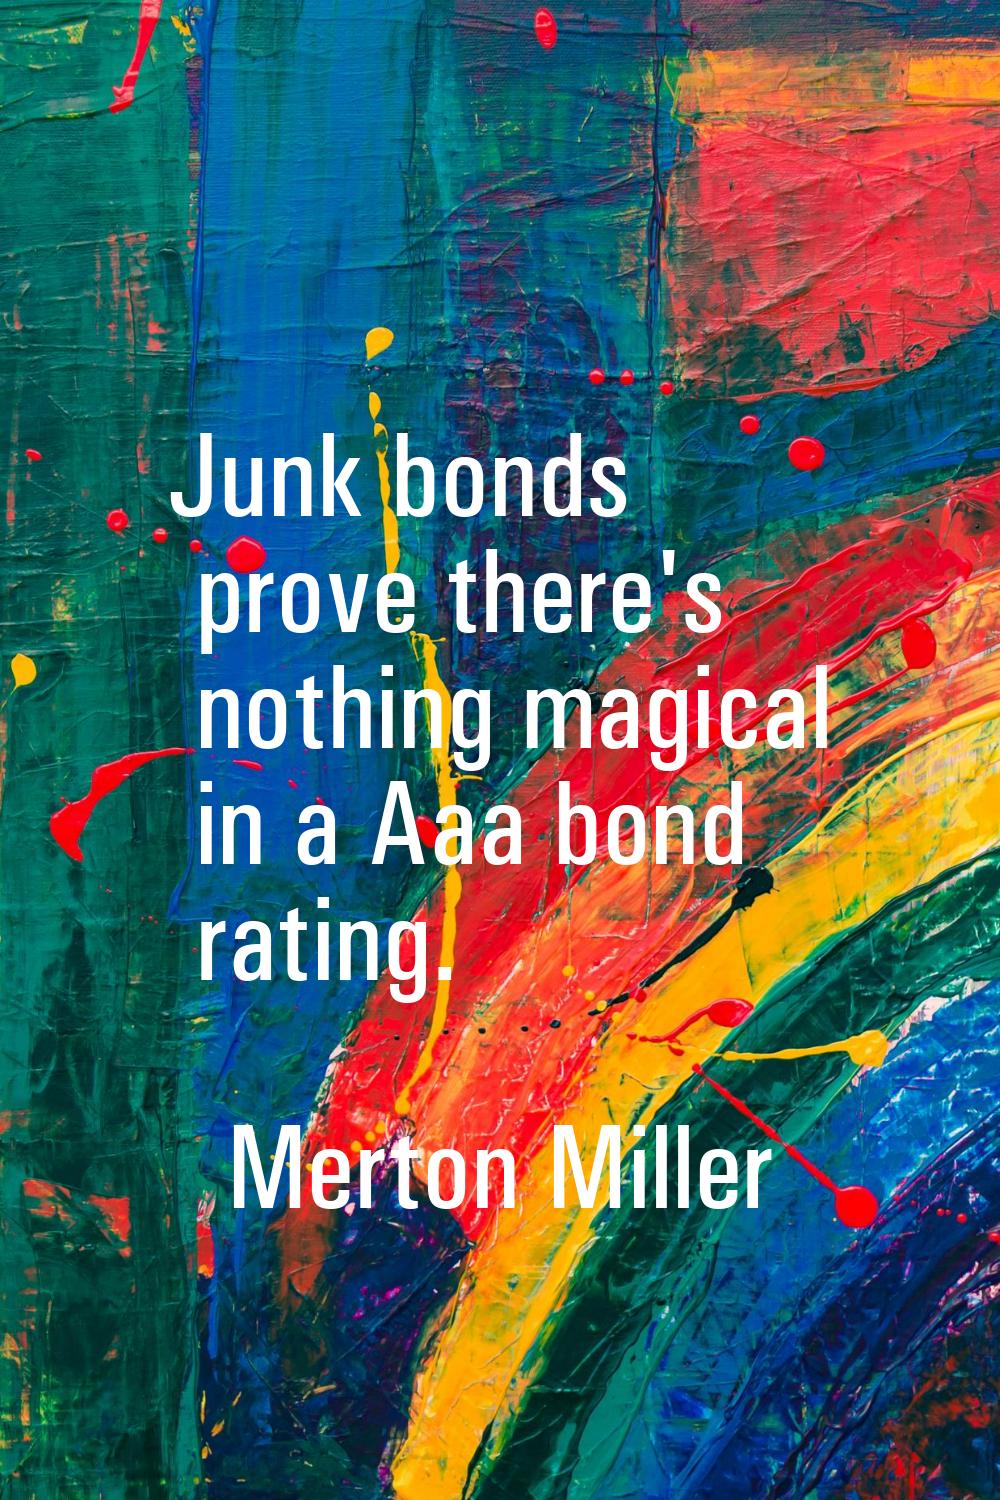 Junk bonds prove there's nothing magical in a Aaa bond rating.